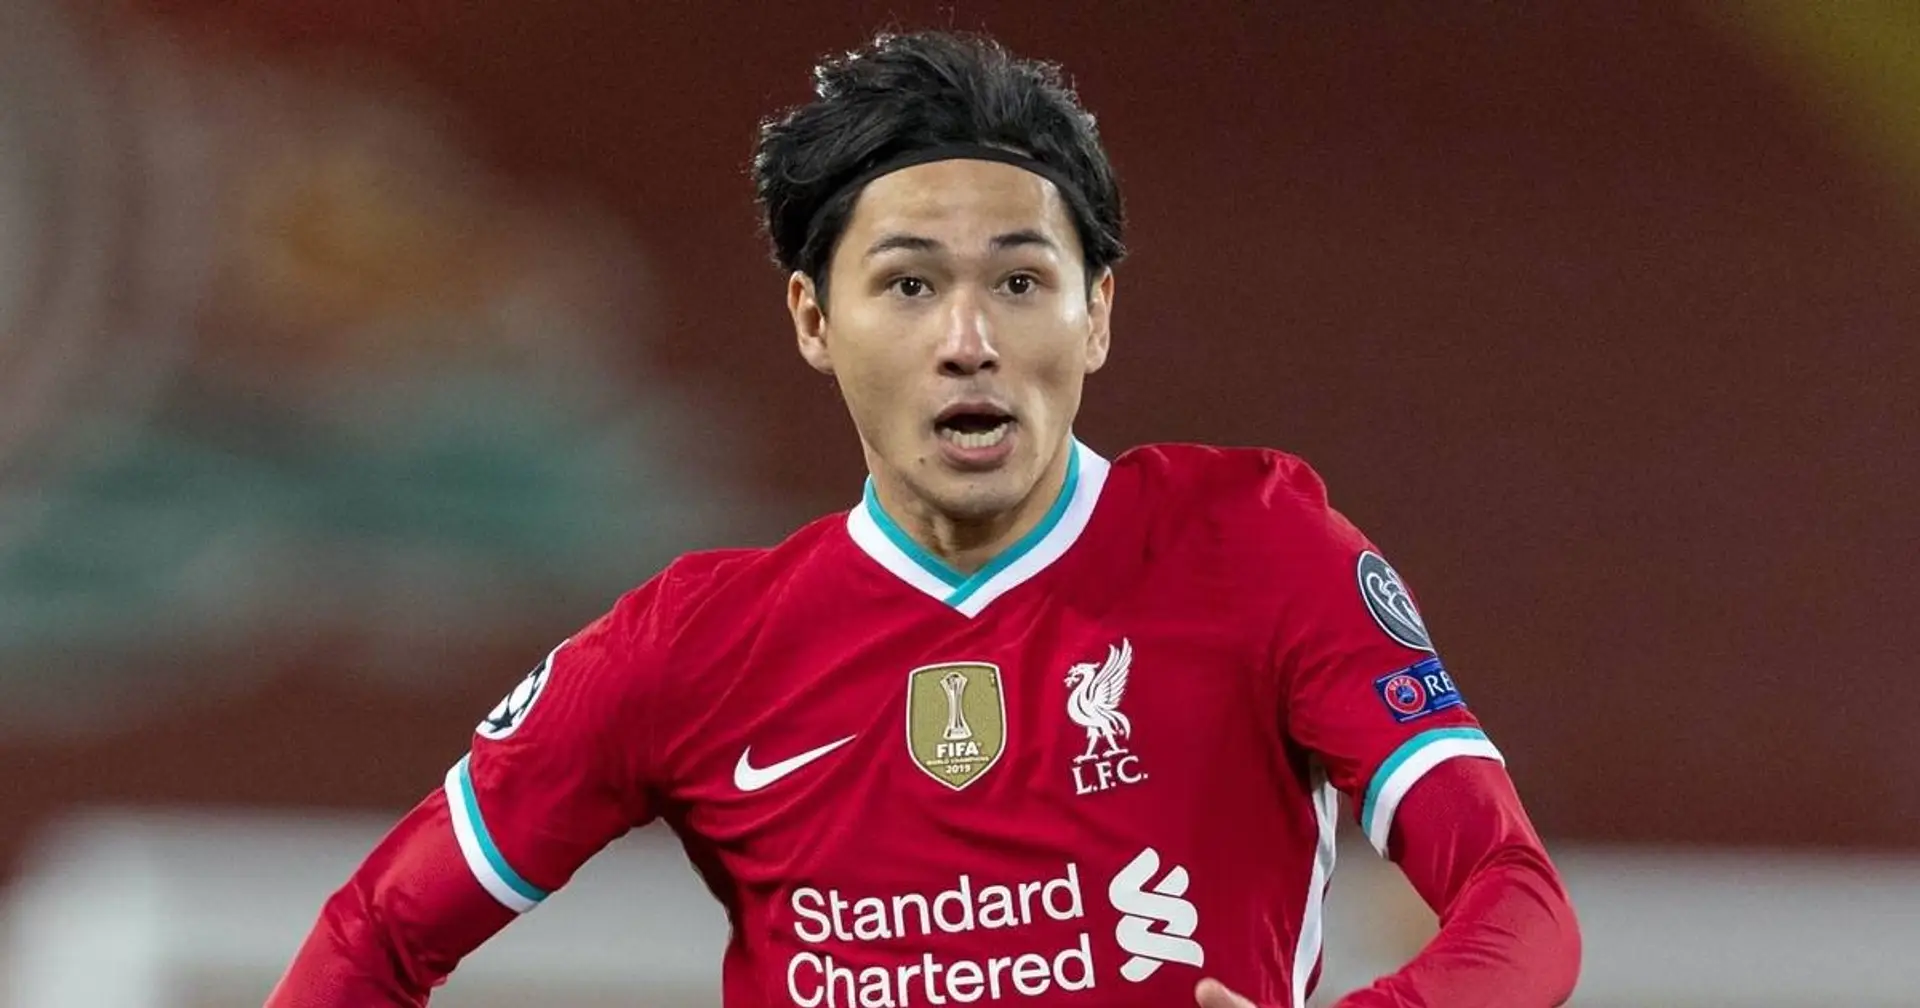 'Will Minamino get game time at Liverpool next season?' - You asked, we answered